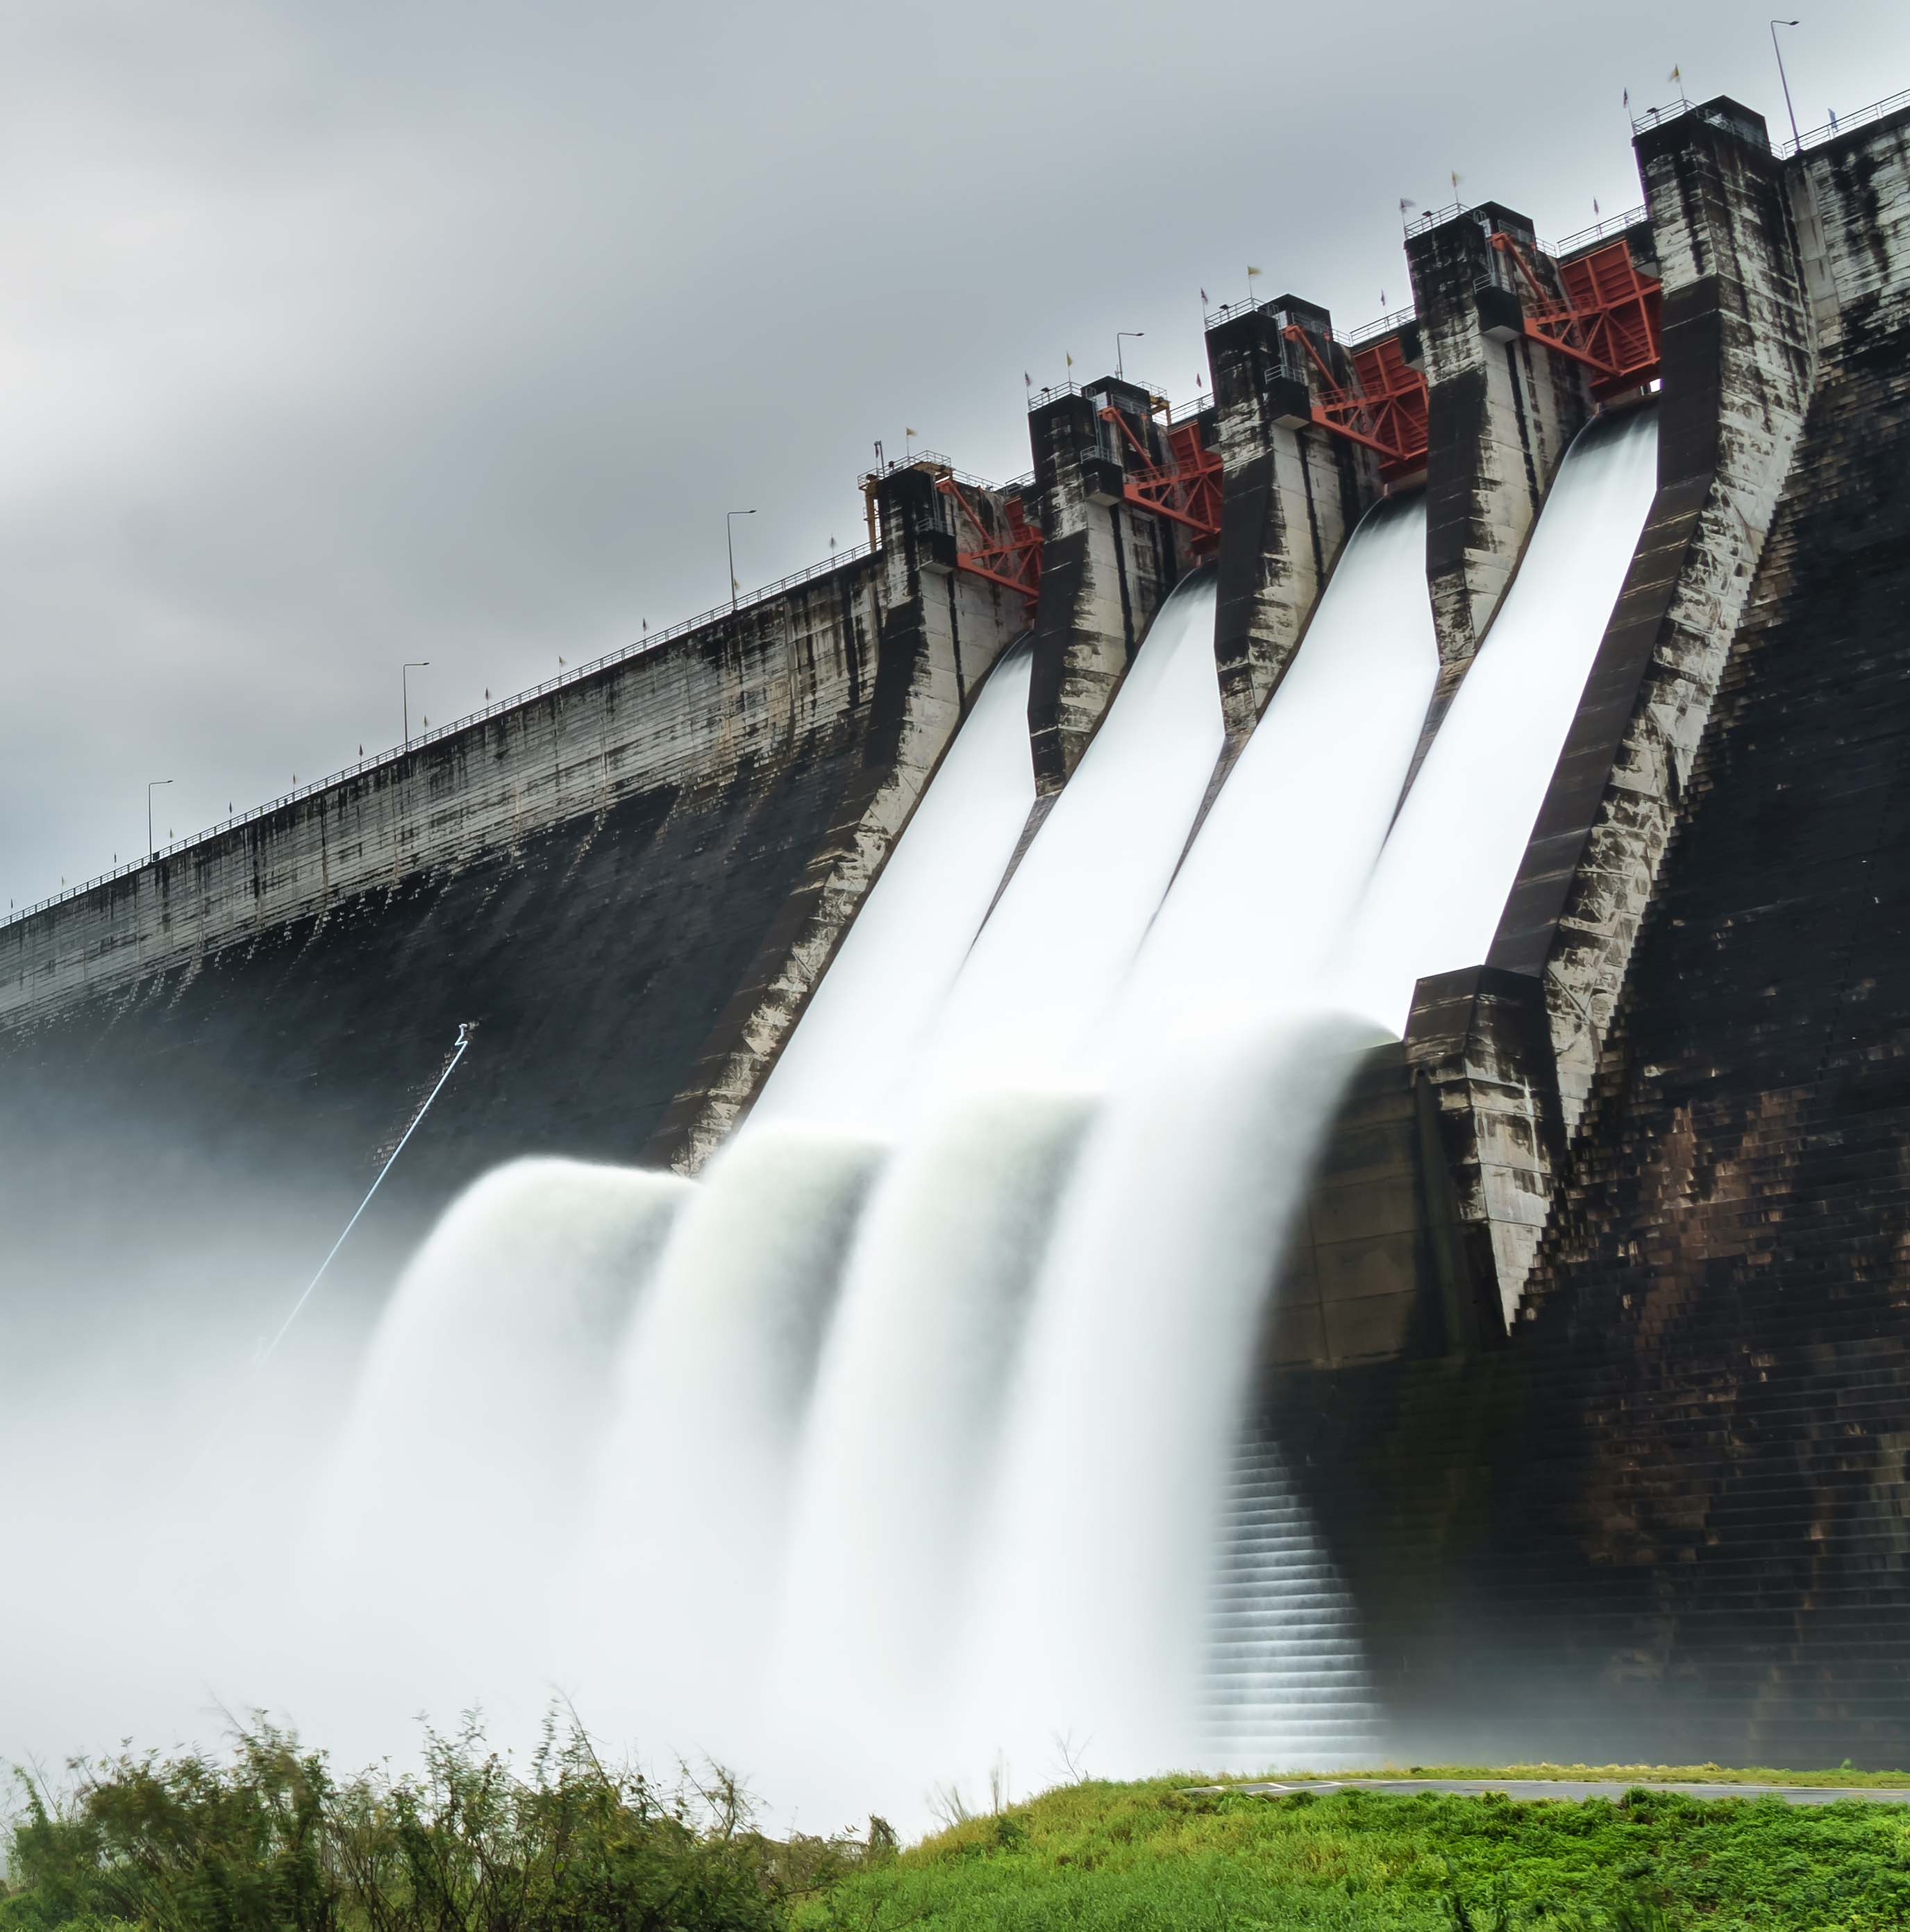 a dam overflows with water into its spillway